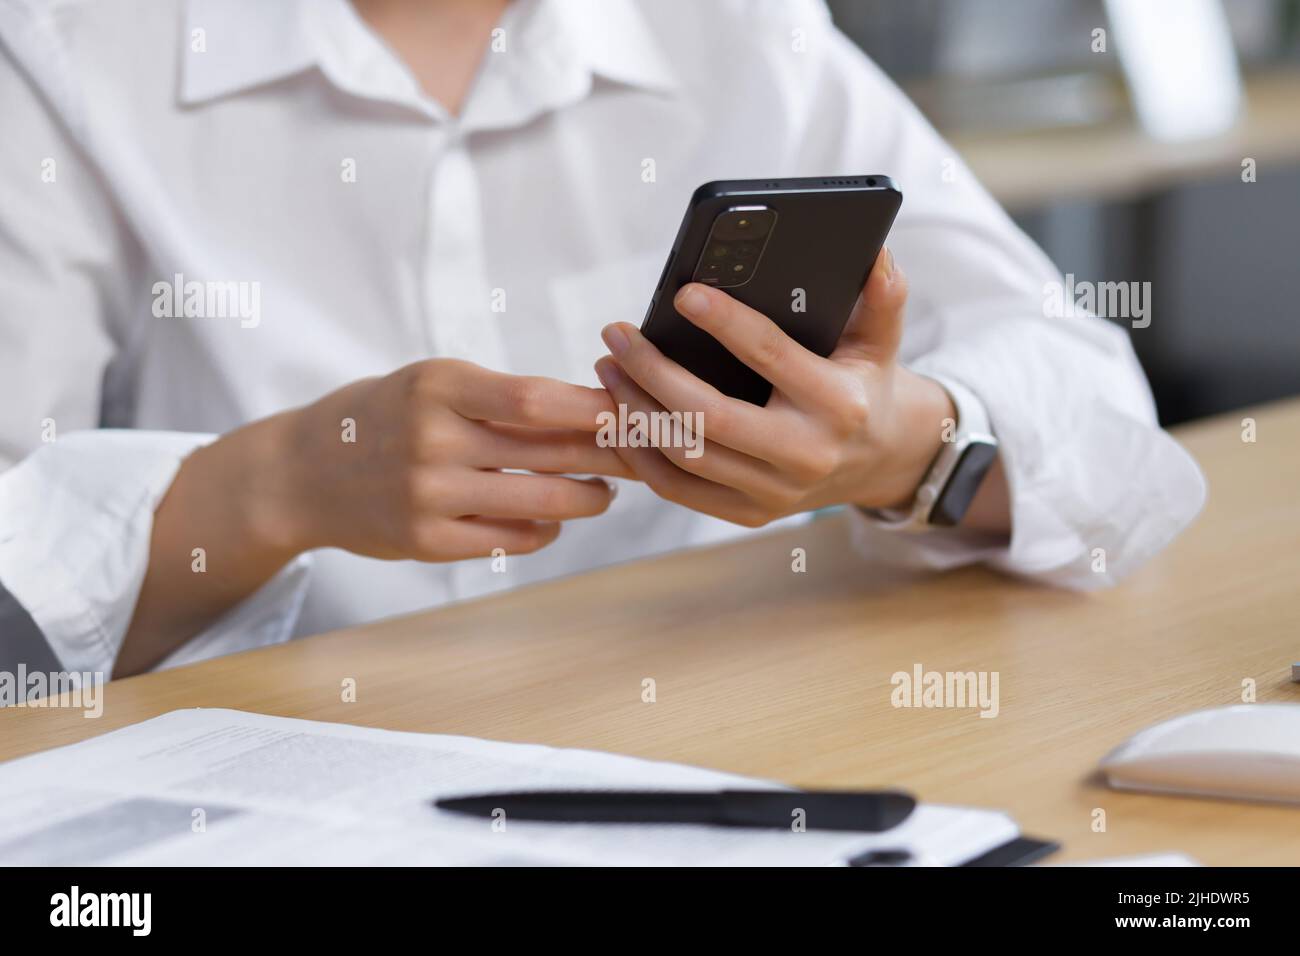 Close-up photo. The hands of a young woman in a white shirt are holding a mobile phone, typing a message at the table. Stock Photo